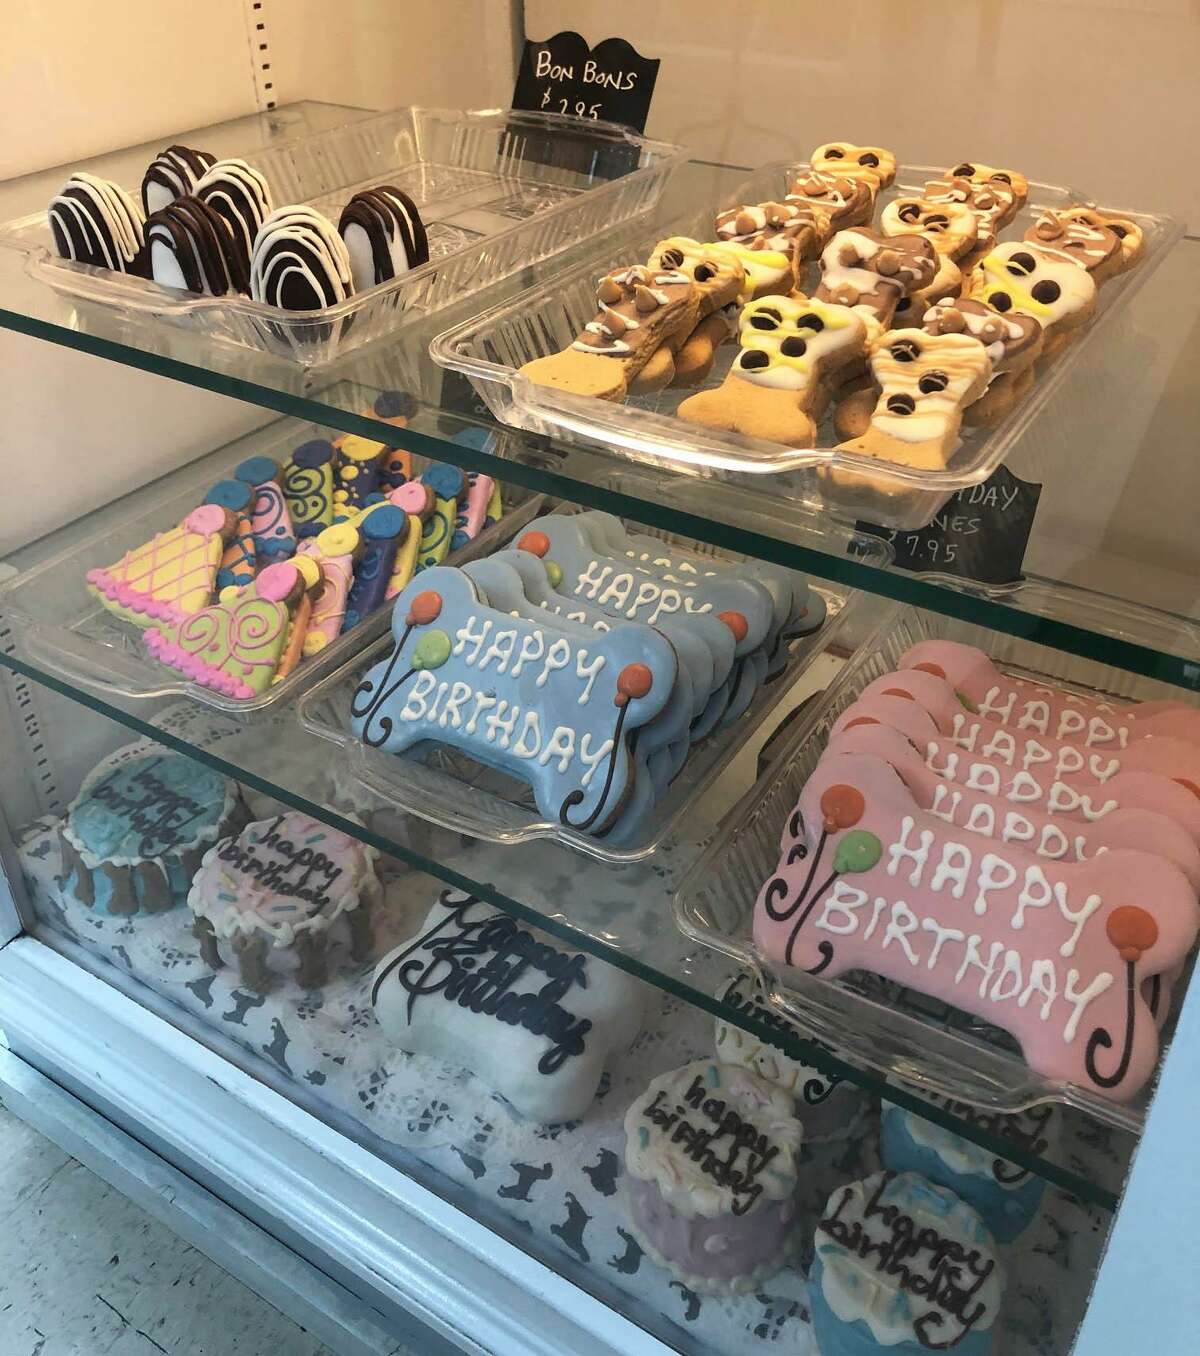 Spectrum/Debbie Bauman, owner of The Barkery Boo’tique in New Milford has moved the business from Bank Street to 92 Park Lane Road (Route 202). A variety of special baked goods are among the items sold at the store. May 2019